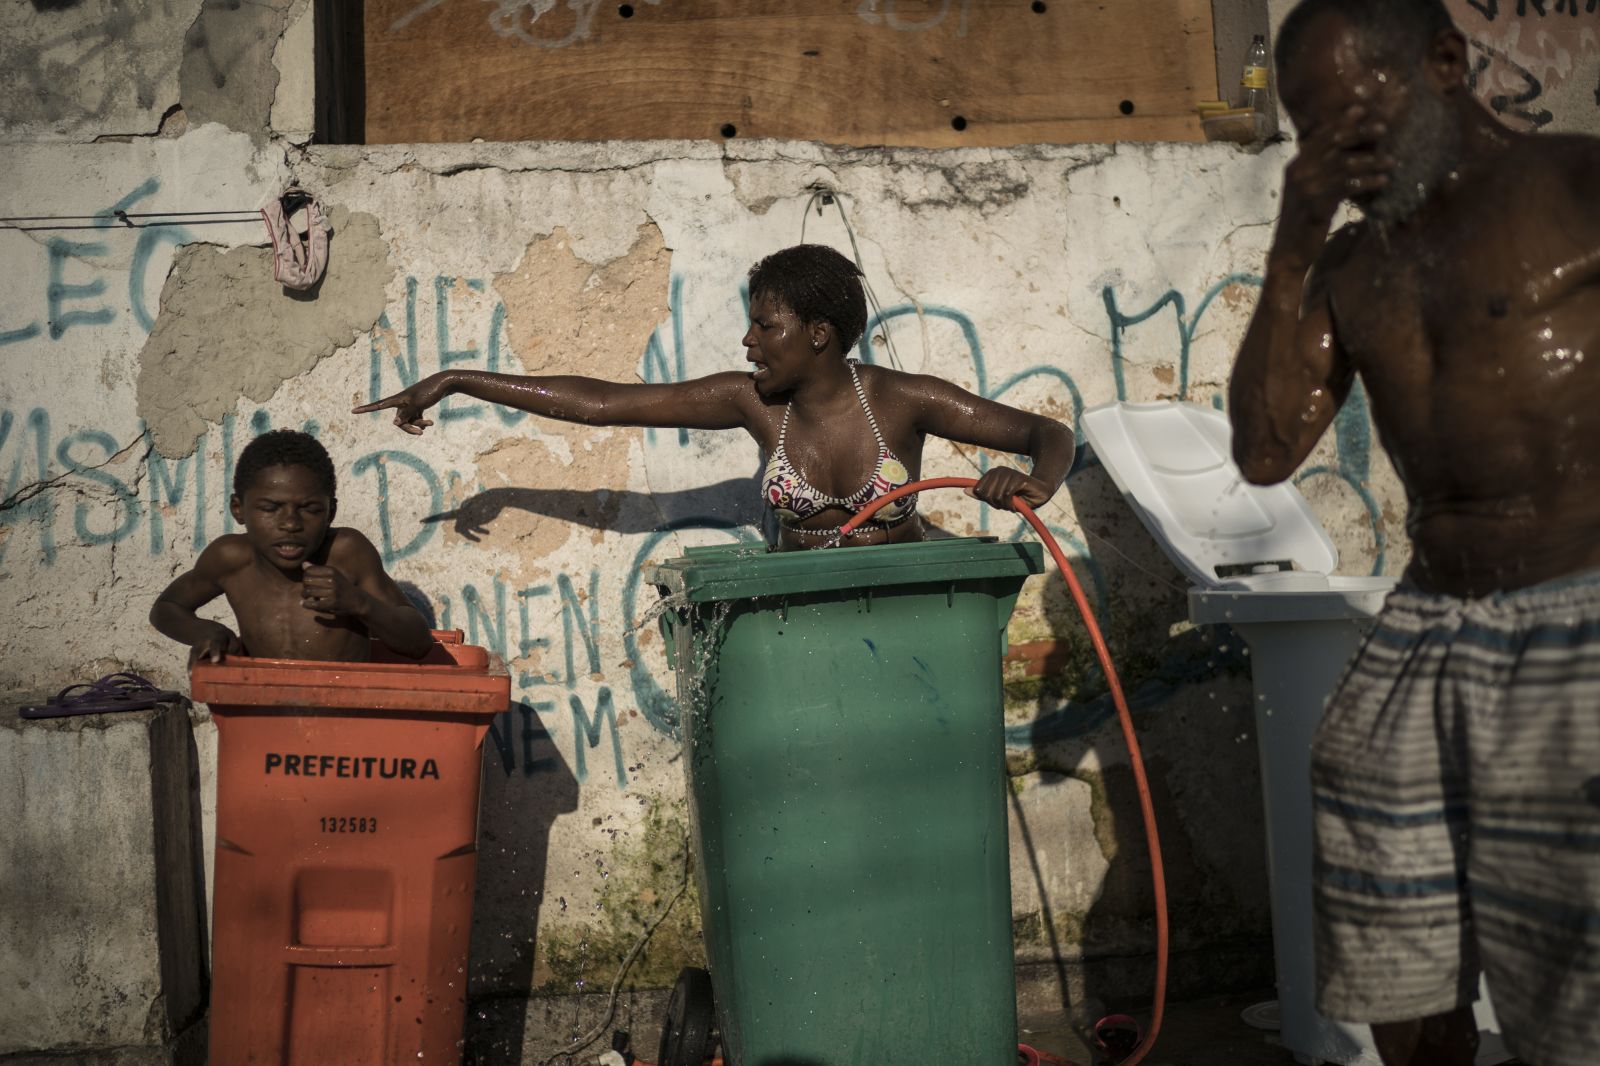 Many Brazilians have fallen back into poverty in recent years: slum dwellers in Rio de Janeiro.